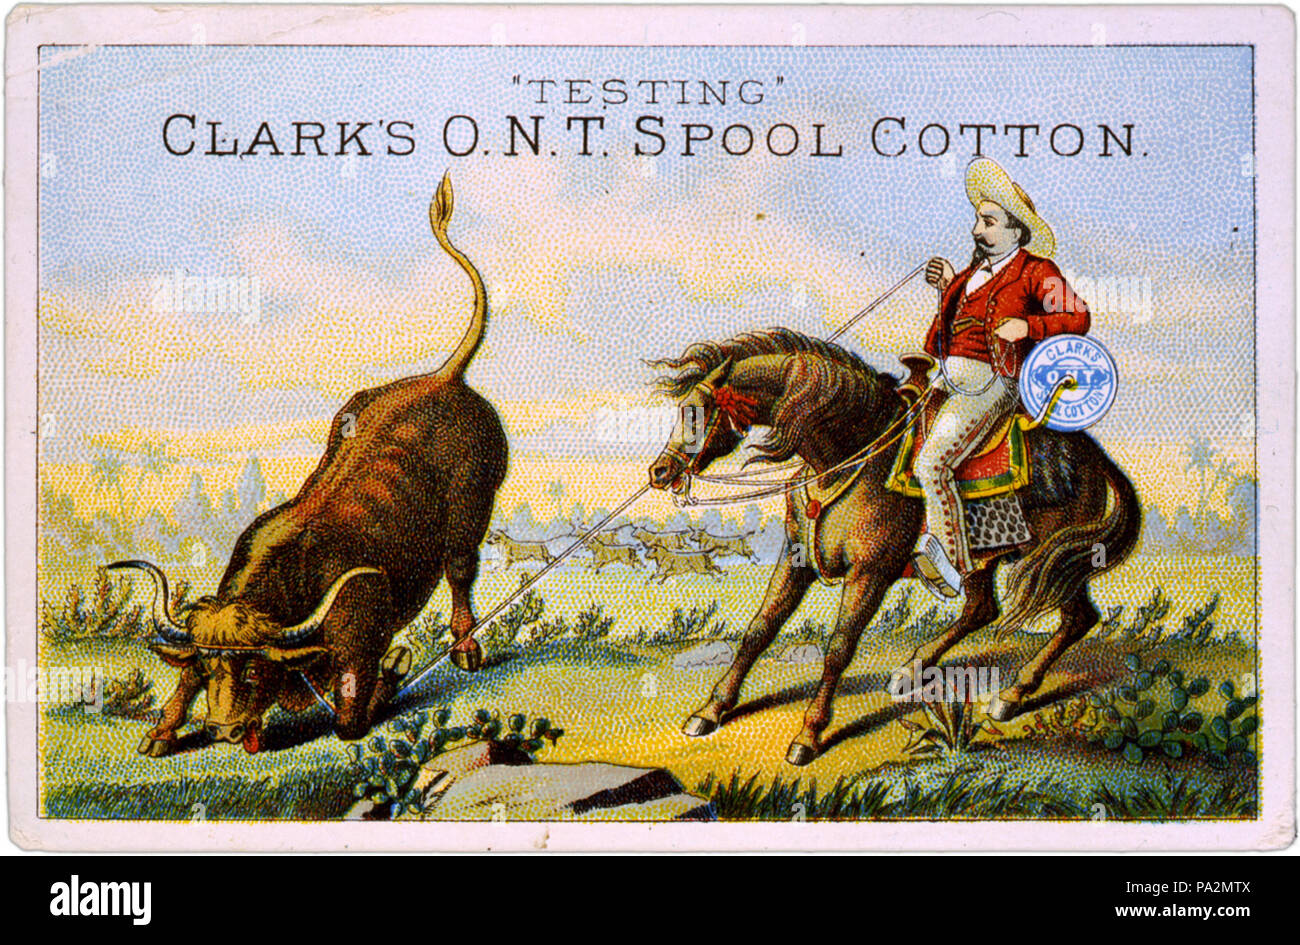 . Trade card, advertising Clark's O.N.T. spool cotton, showing man roping steer. 1 print : ltihograph, color. between 1875 and 1900 322 Clark's O.N.T. spool cotton trade card, 1875-1900 Stock Photo